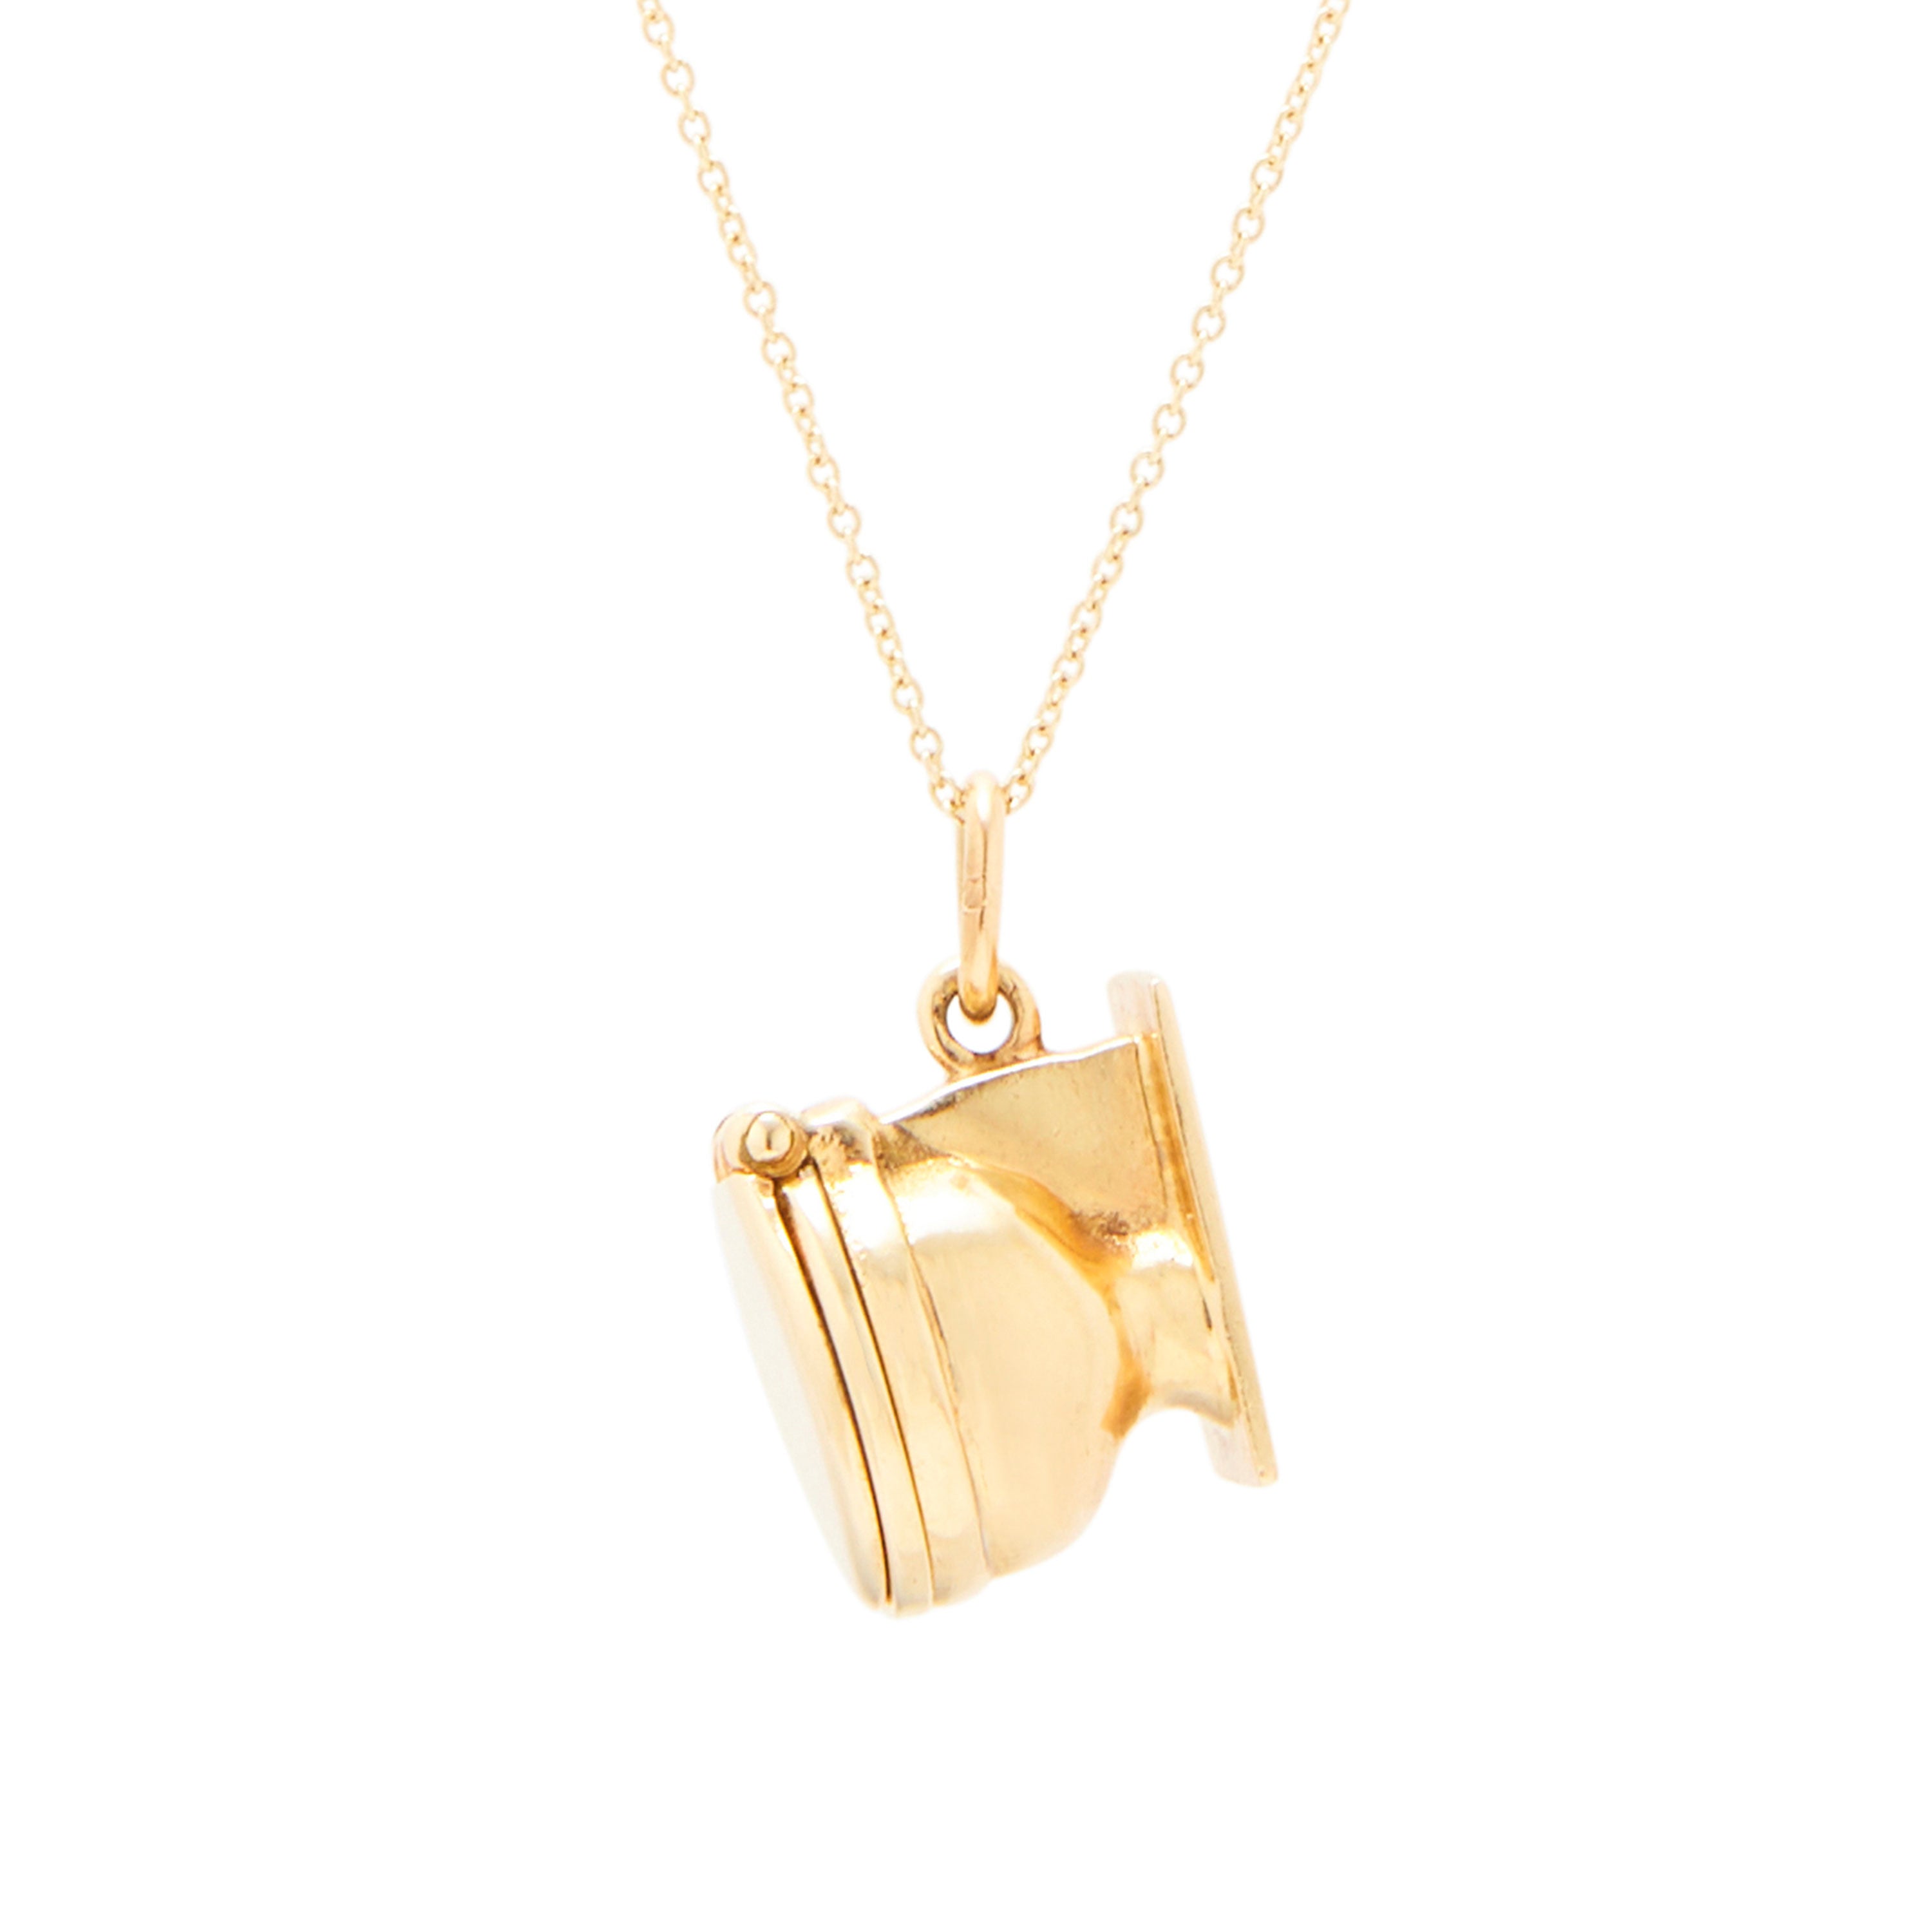 Movable 14K Gold And Enamel Toilet Charm